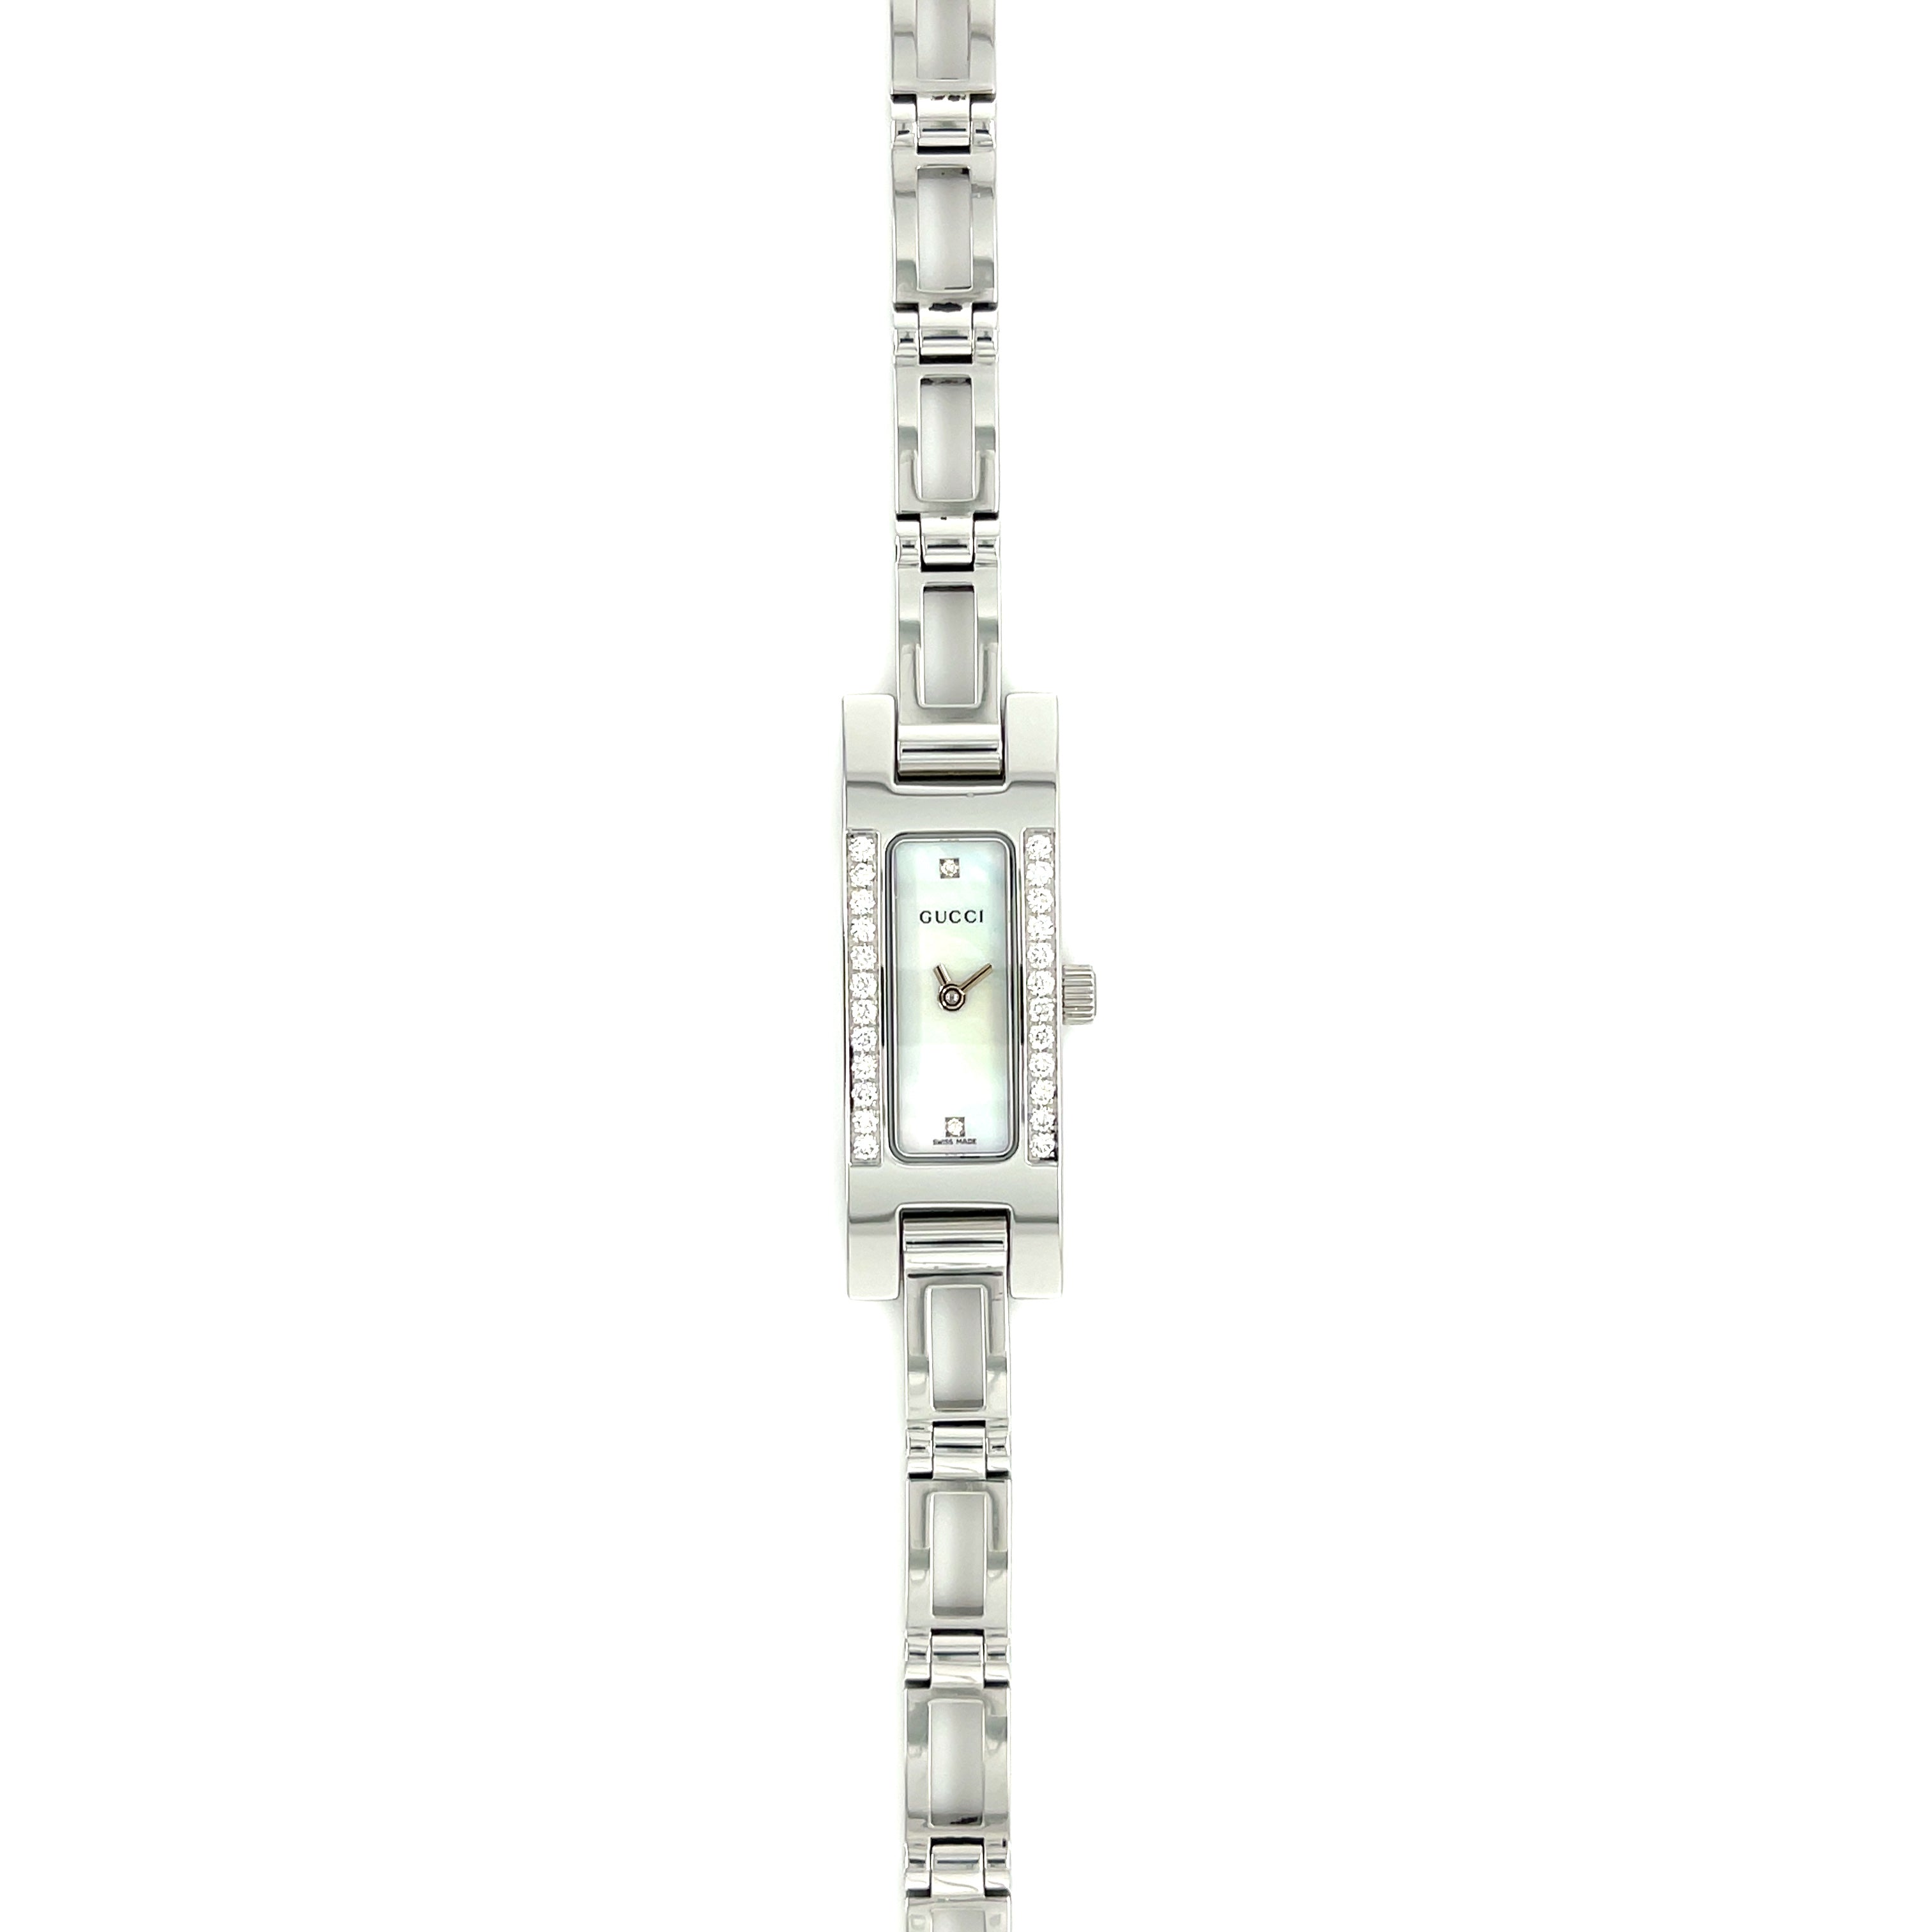 GUCCI 3900L Ladies Diamond Mother of Pearl Watch SOLD